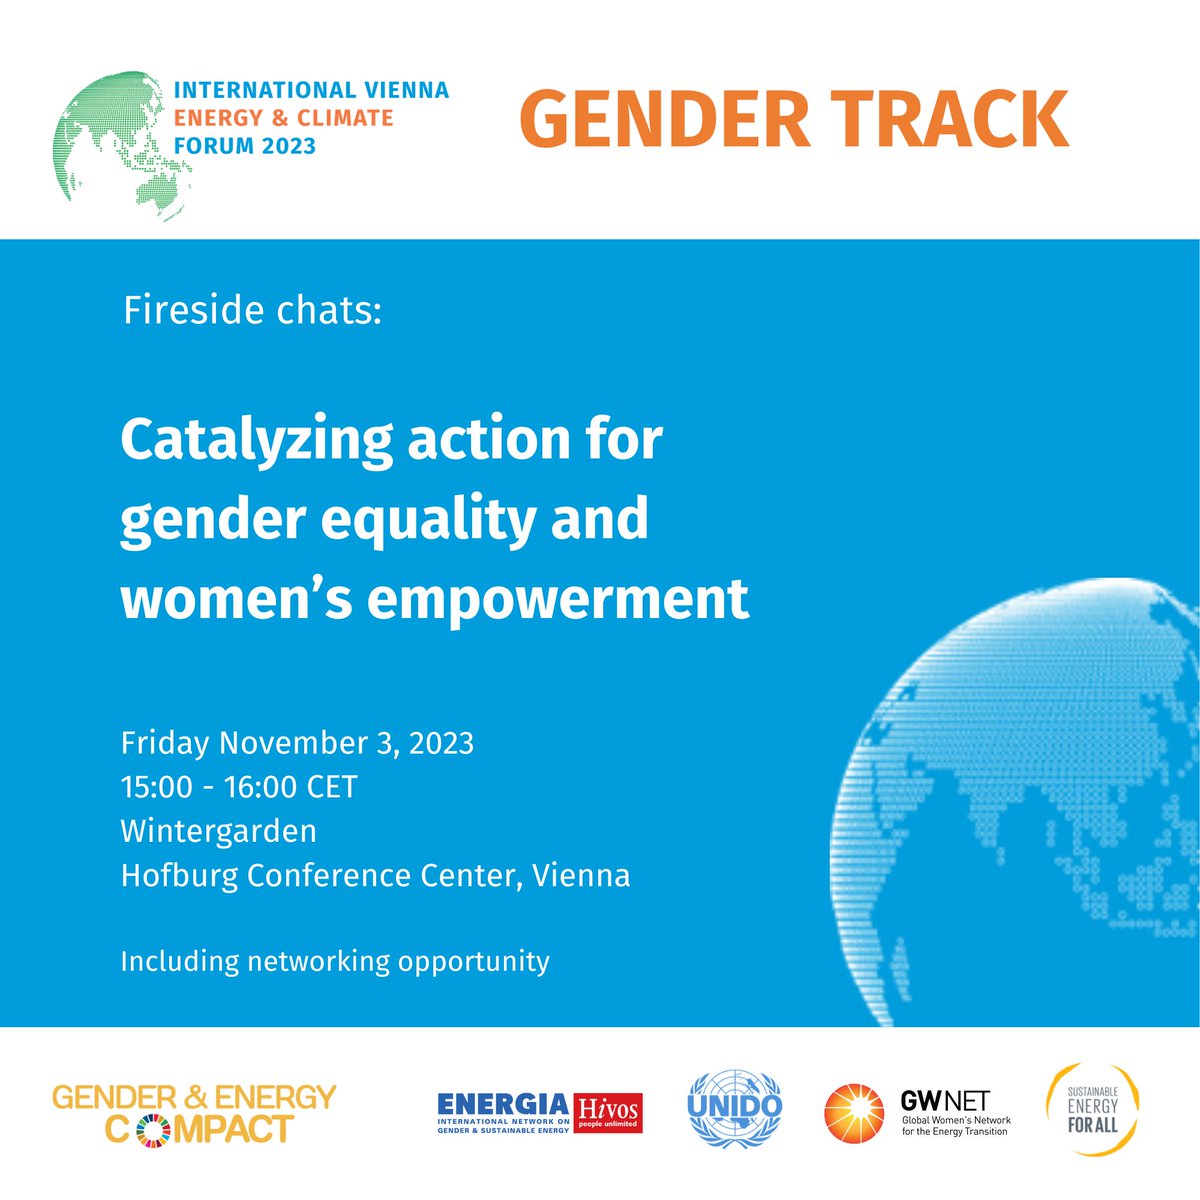 Closing off the @IntForumVienna with a big bang: 2 #GenderEquality events! At 11:30 & 15:00 How to increase female participation in the sector, need for gender-disaggregated data & best practices. #GenderEnergyCompact 📍Trabantenstube & Wintergarden 💻 youtube.com/@UNIDObeta/str…